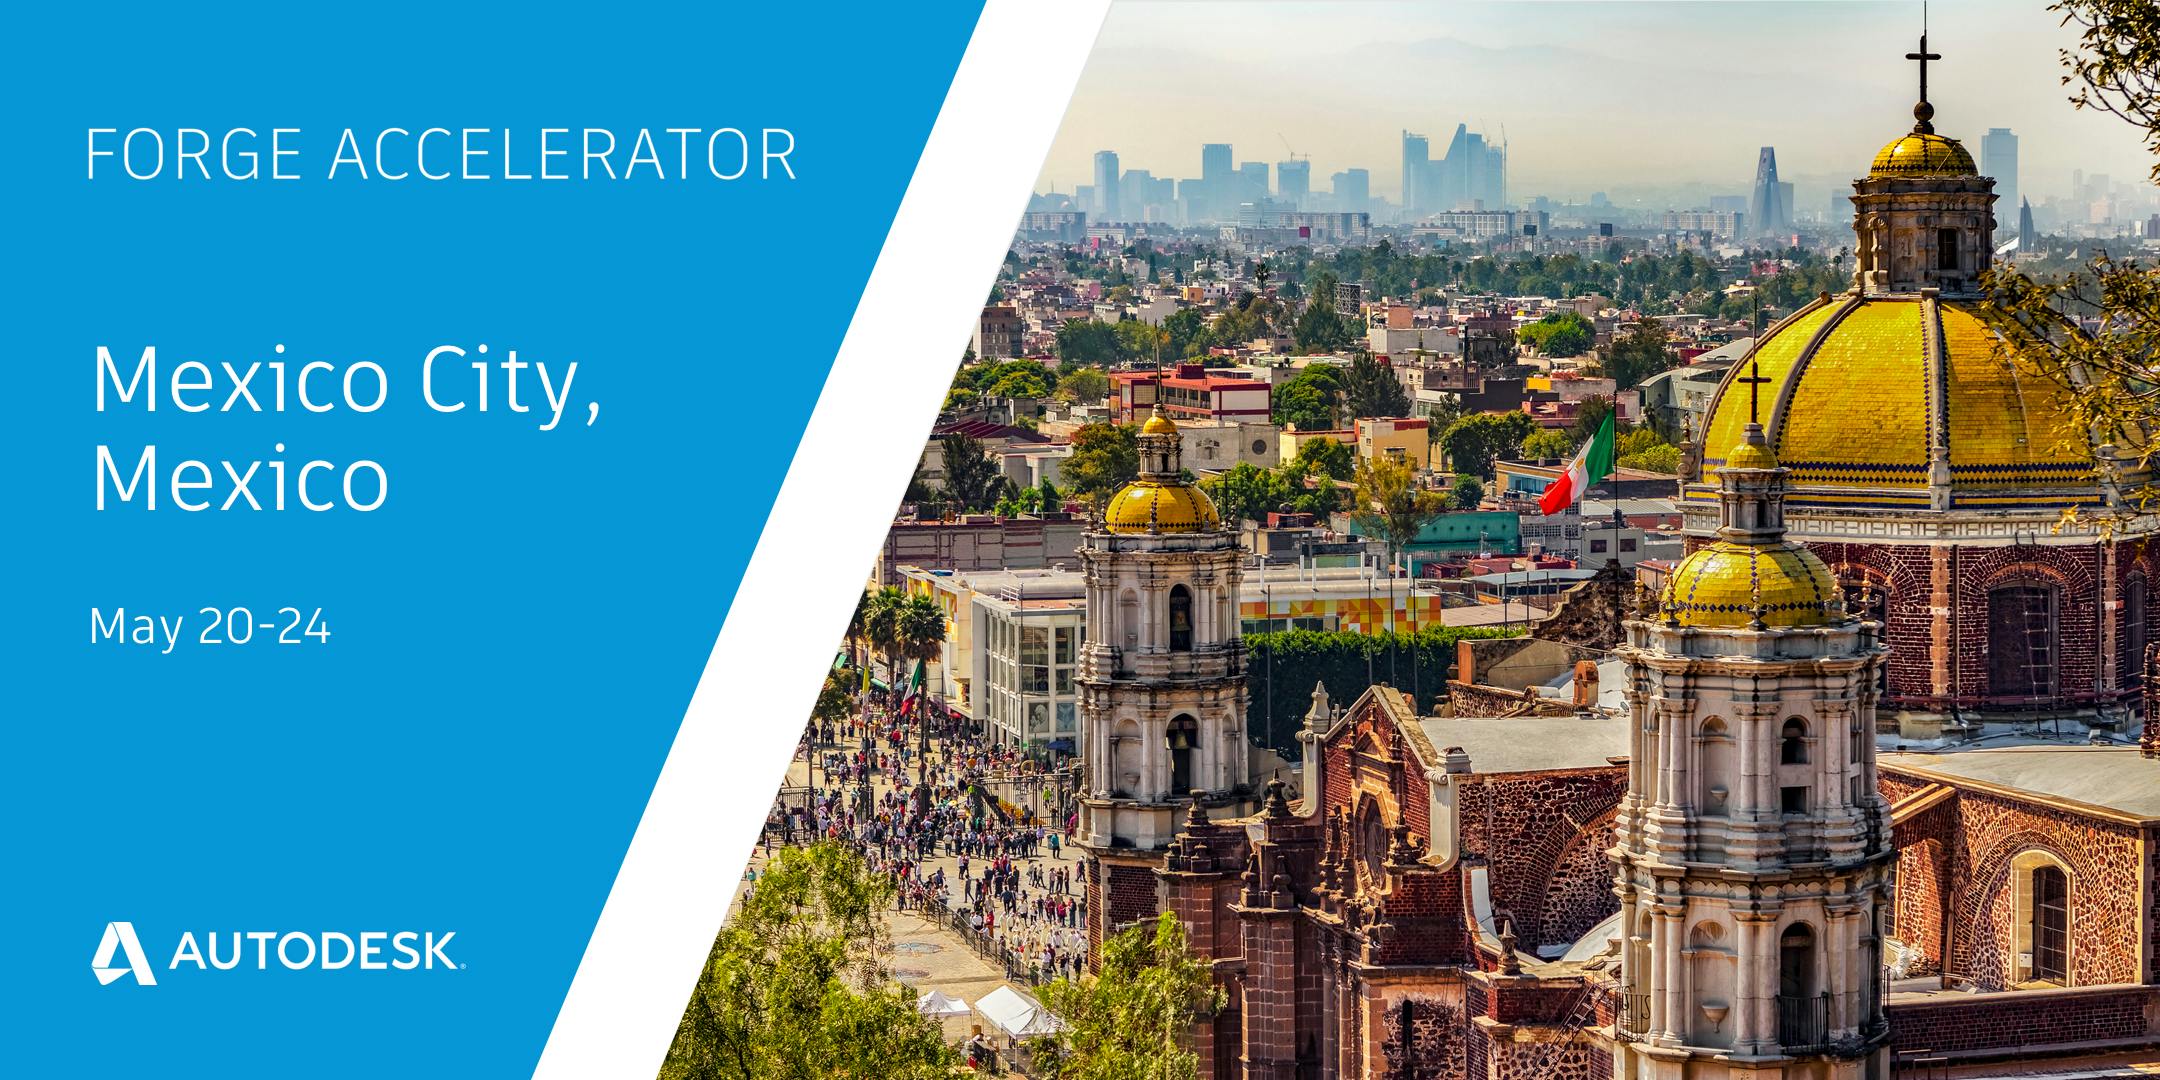 Autodesk Forge Accelerator - Mexico City (May 20-24)